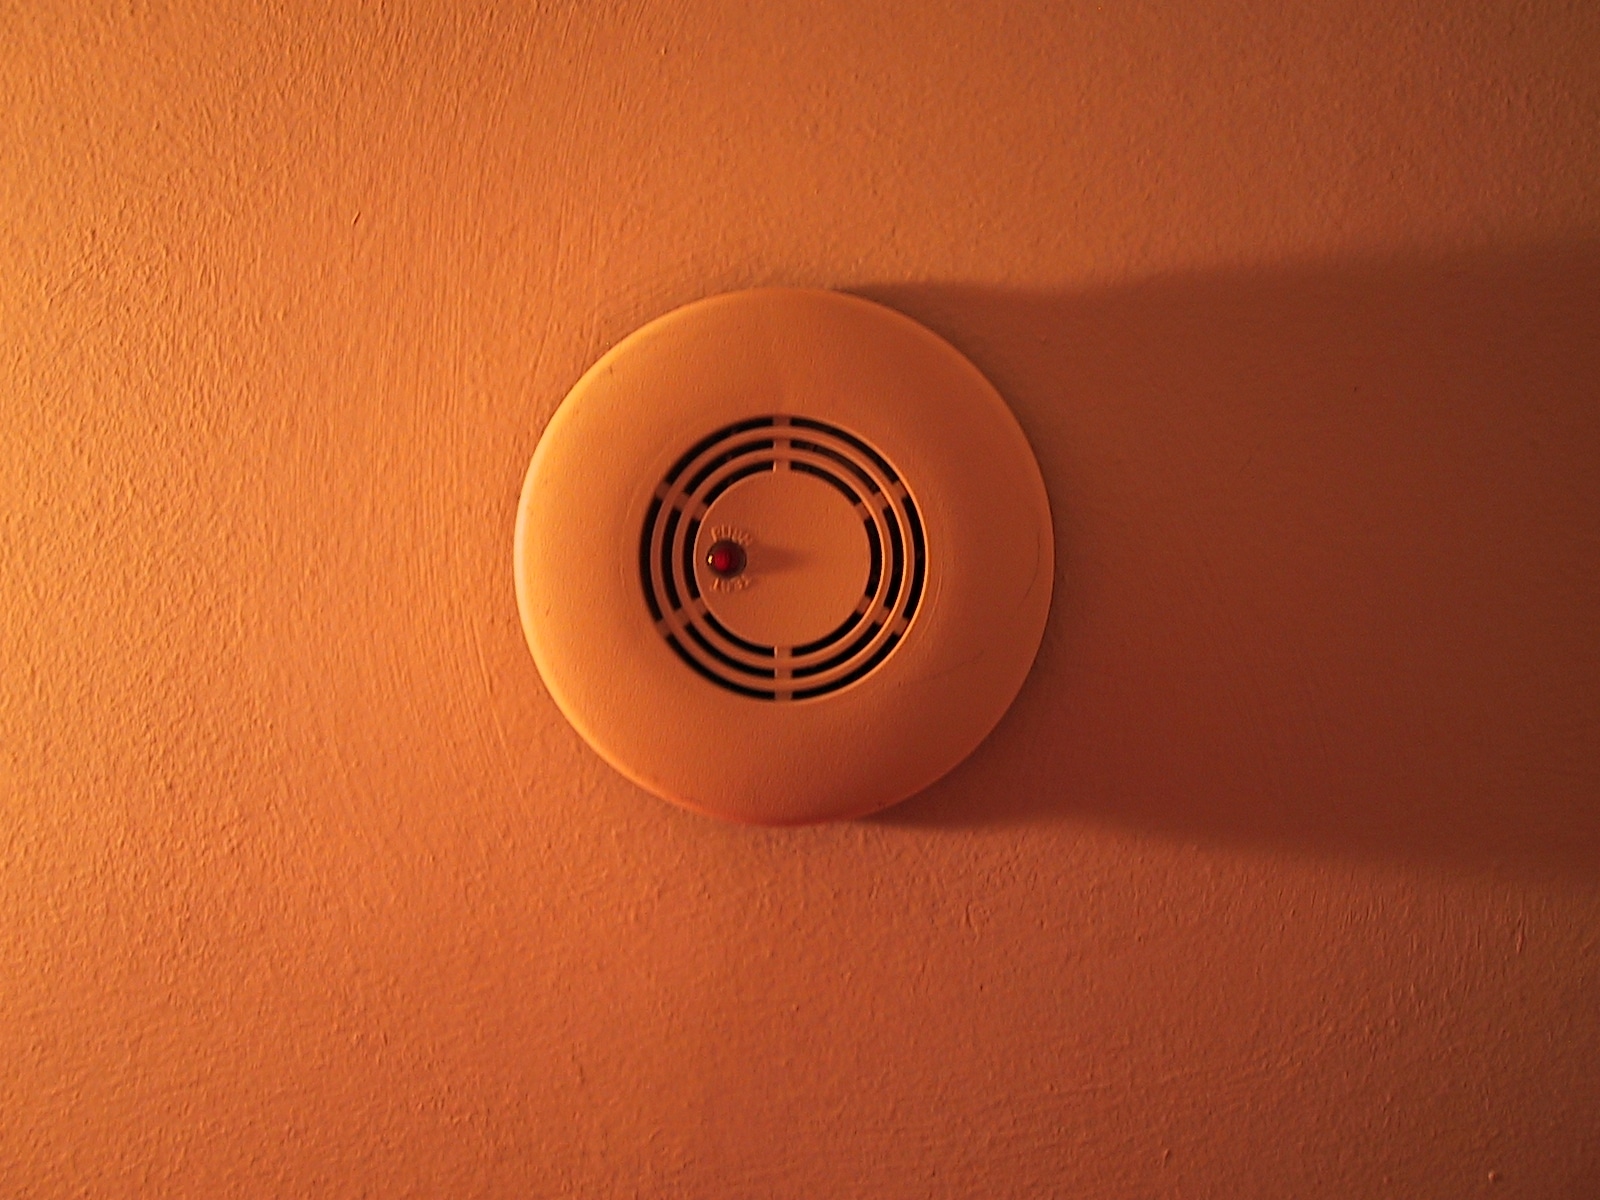 New warnings over unsafe alarms